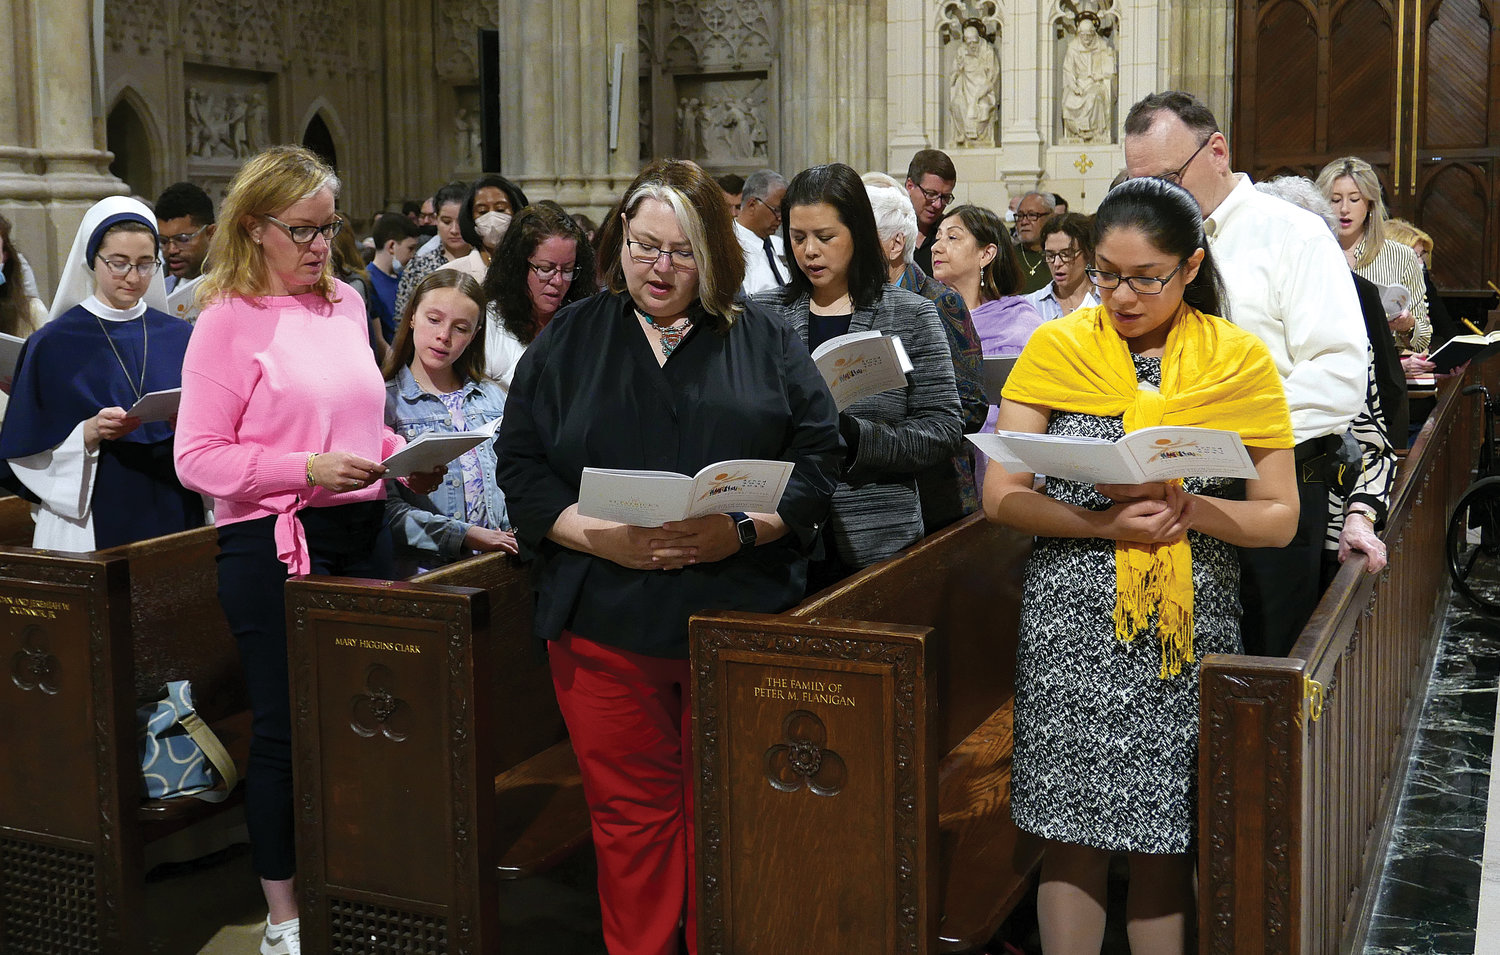 SHARED MISSION—Congregants assemble for the Synodal Unity Mass of Thanksgiving Cardinal Dolan celebrated May 15 at St. Patrick’s Cathedral. The Synod’s local leadership includes Elizabeth Guevara de Gonzalez, director of the archdiocesan Office of Adult Faith Formation, far right in yellow shawl. Next to Ms. de Gonzalez is Ela Milewska, executive director of the Department of Youth Faith Formation.